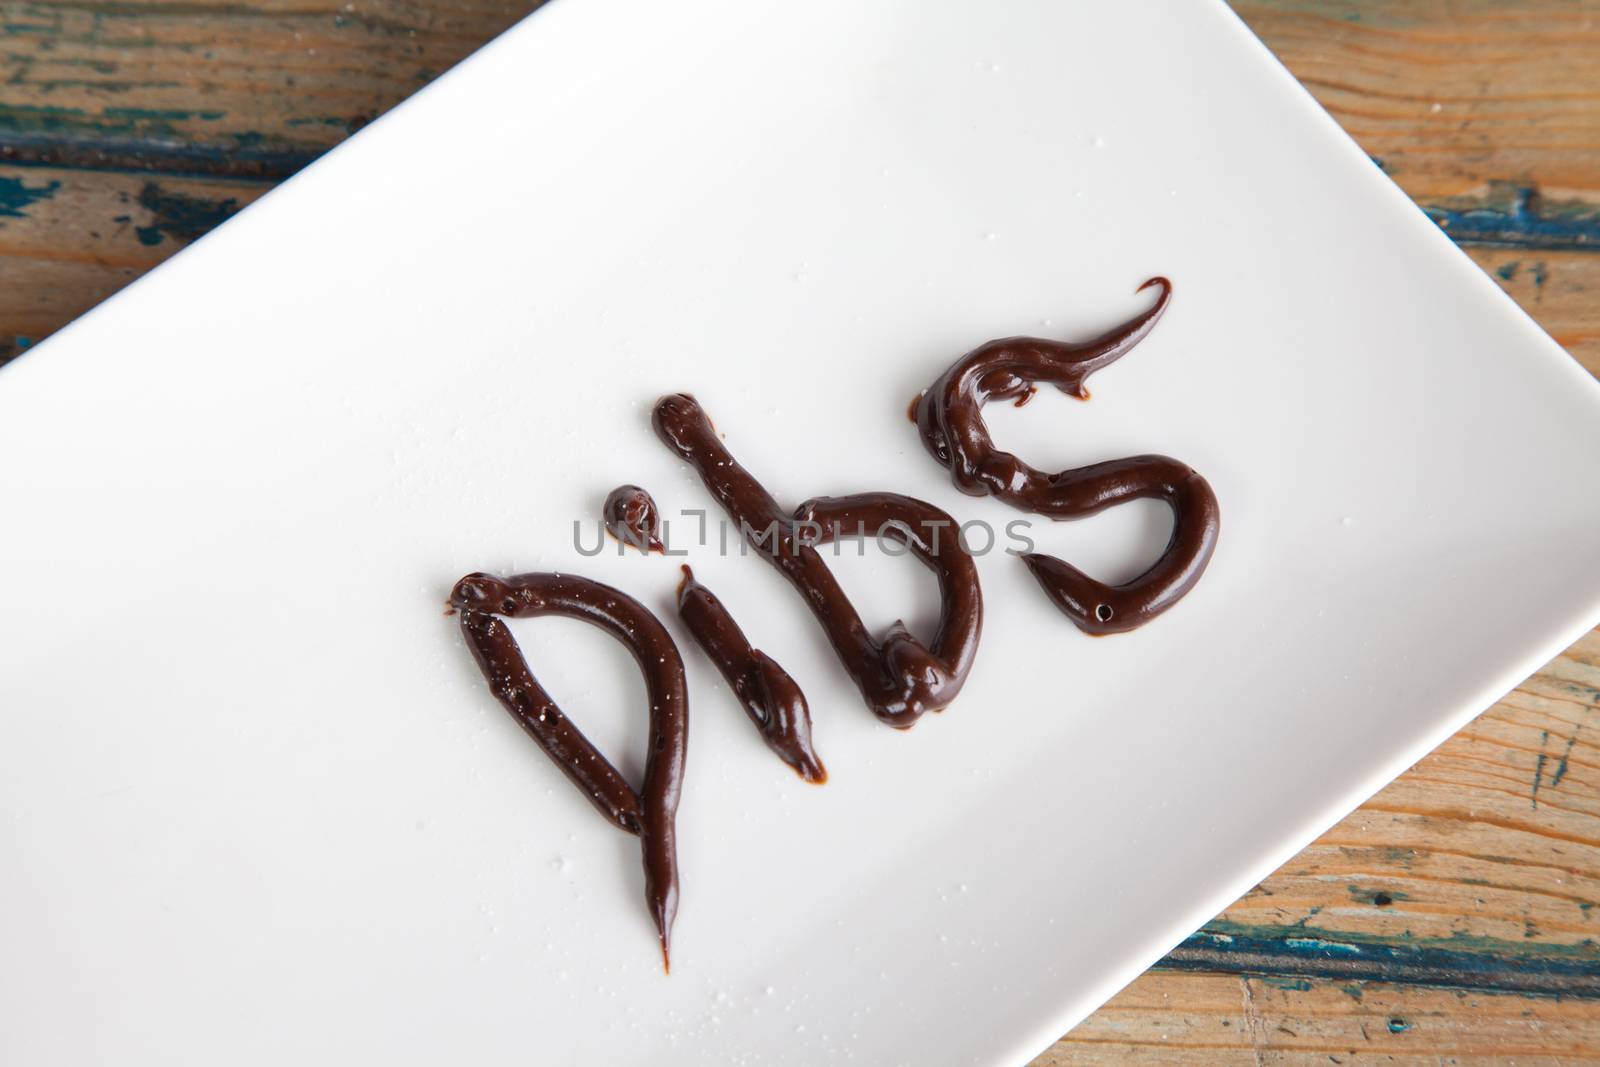 Dibs written on plate with chocolate fudge